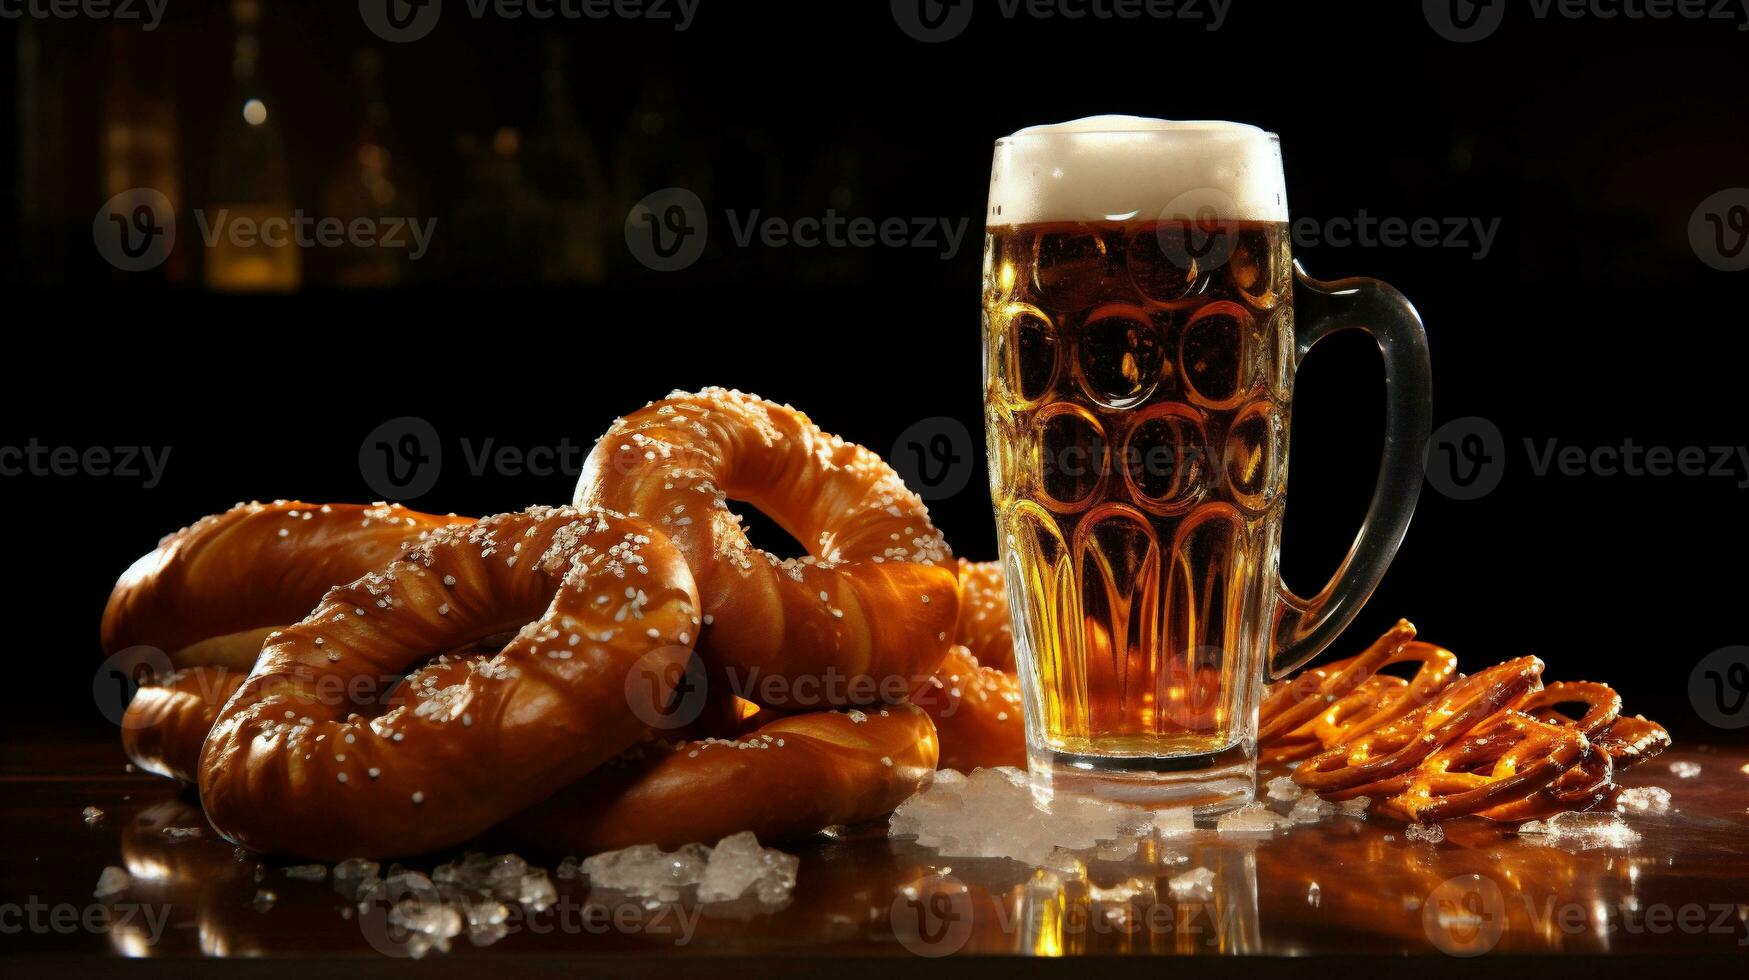 Oktoberfest beer and pretzels on a wooden table photo